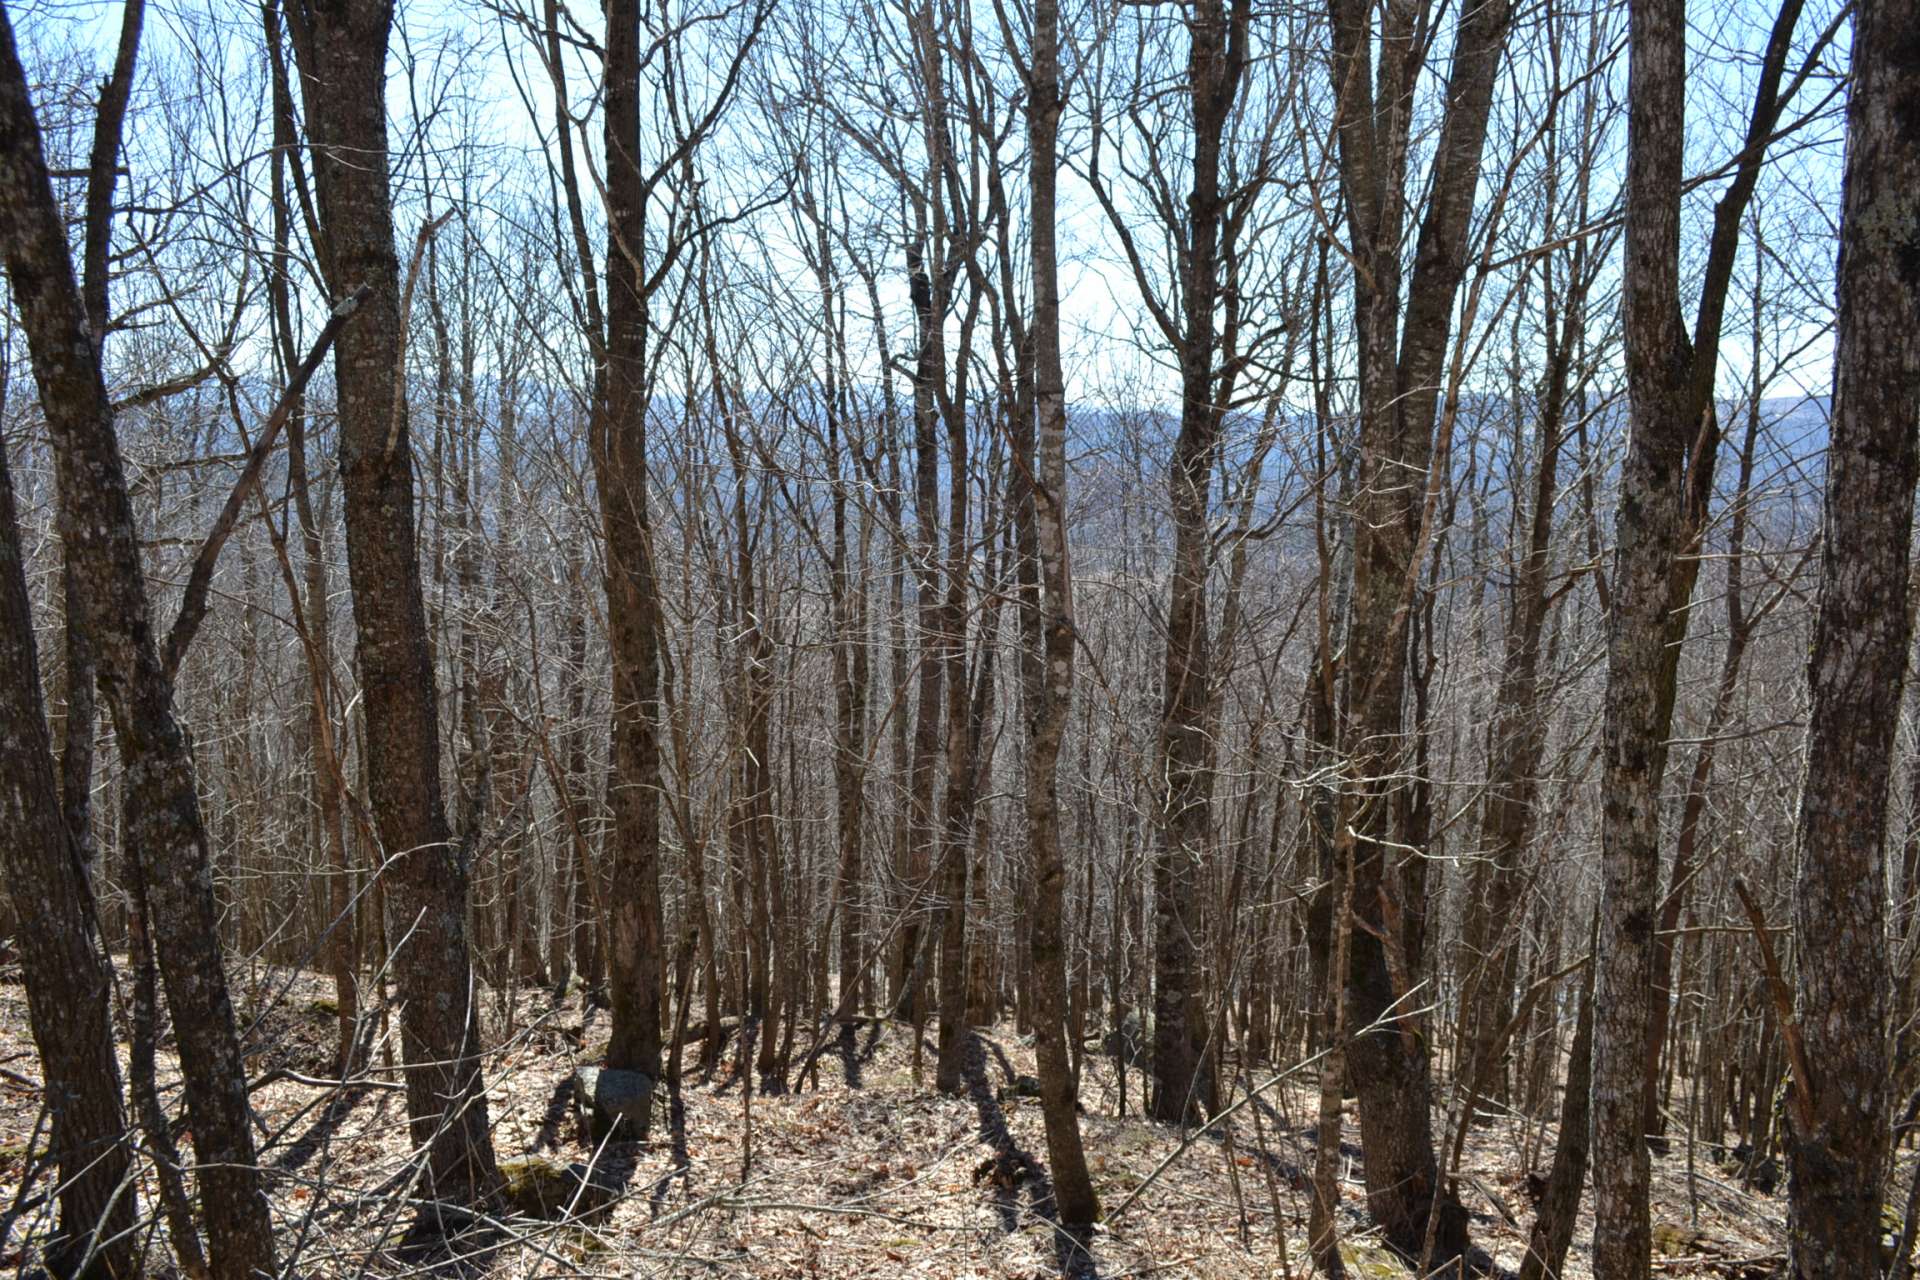 Lot 6 is a naturally wooded 2.01 acre lot with great view potential and priced at $25,000.